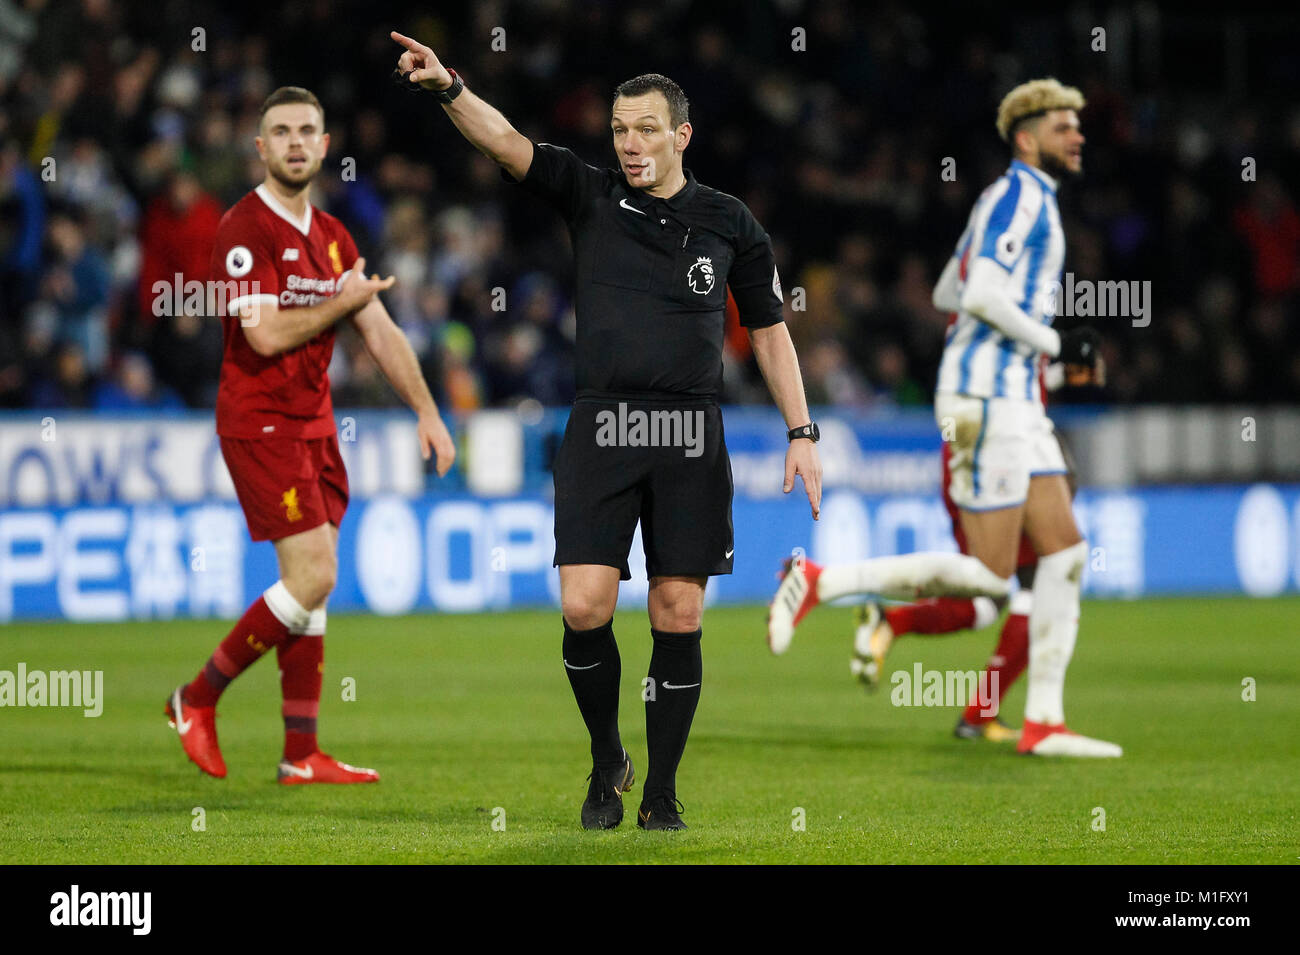 Huddersfield, UK. 30th Jan, 2018. Referee Kevin Friend during the Premier League match between Huddersfield Town and Liverpool at John Smith's Stadium on January 30th 2018 in Huddersfield, England. (Photo by Daniel Chesterton/phcimages.com) Credit: PHC Images/Alamy Live News Stock Photo